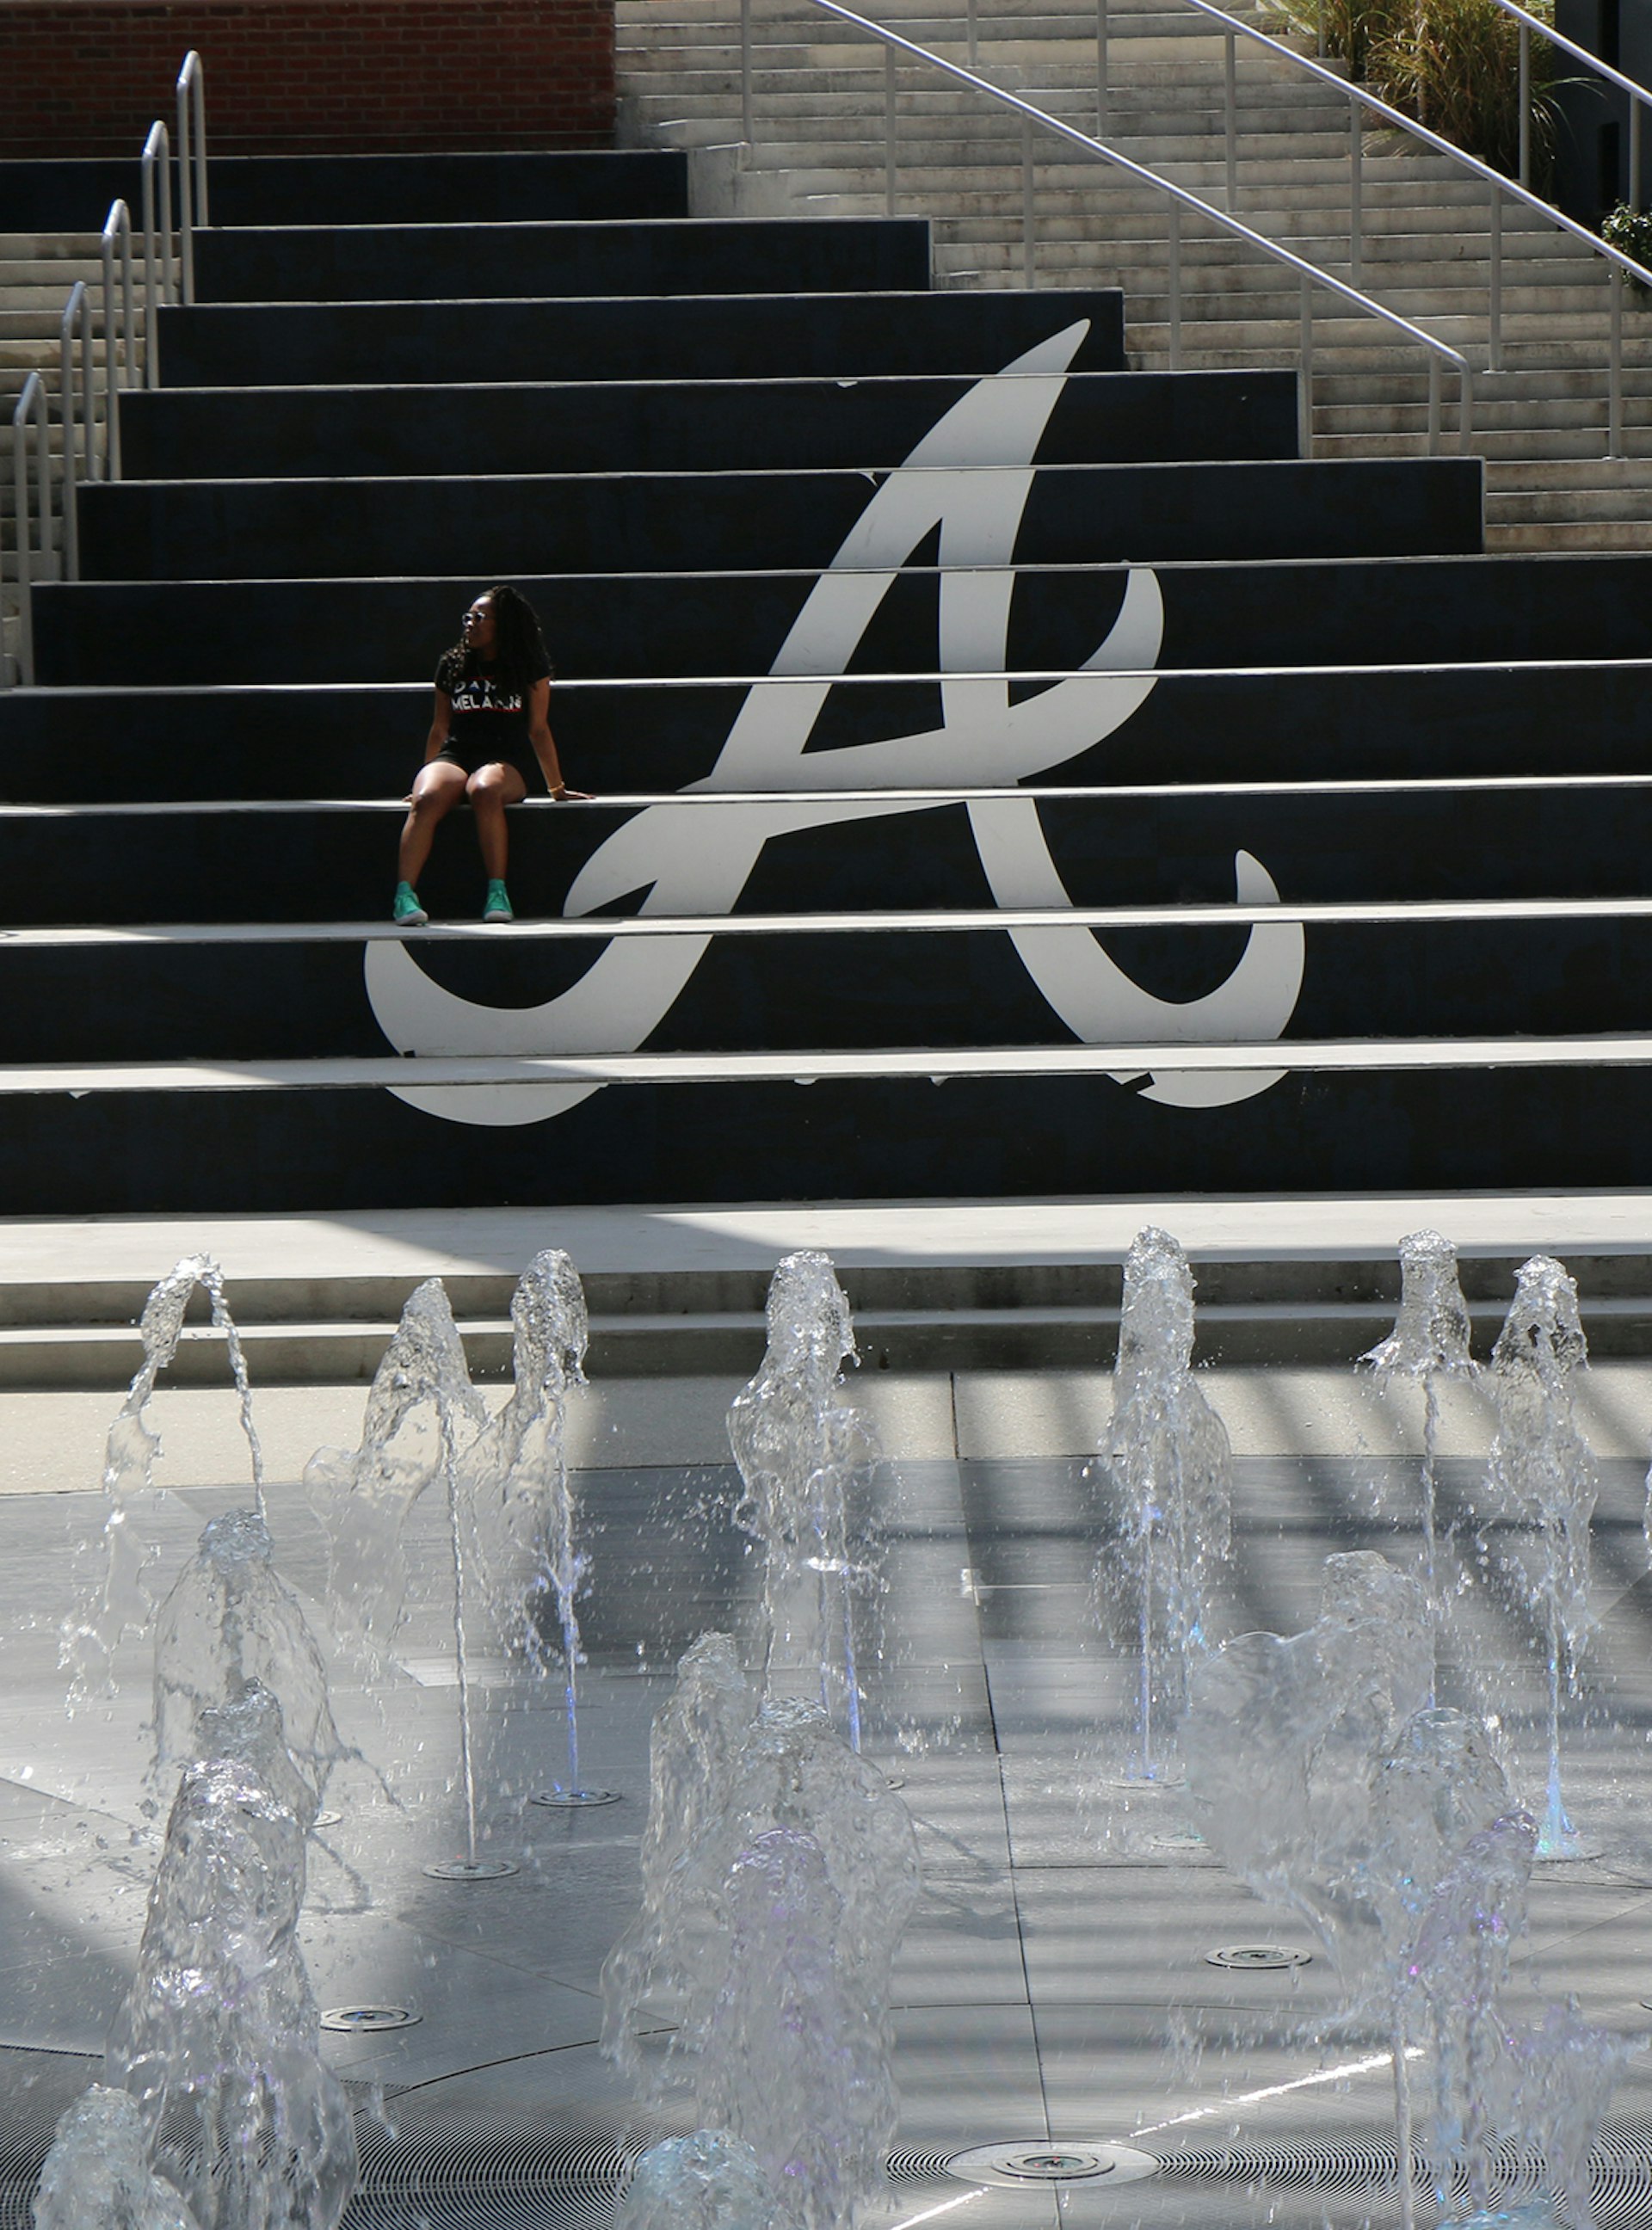 long shot of woman sitting on staircase painted with the letter 'A' for the Atlanta Braves, with fountains in the foreground